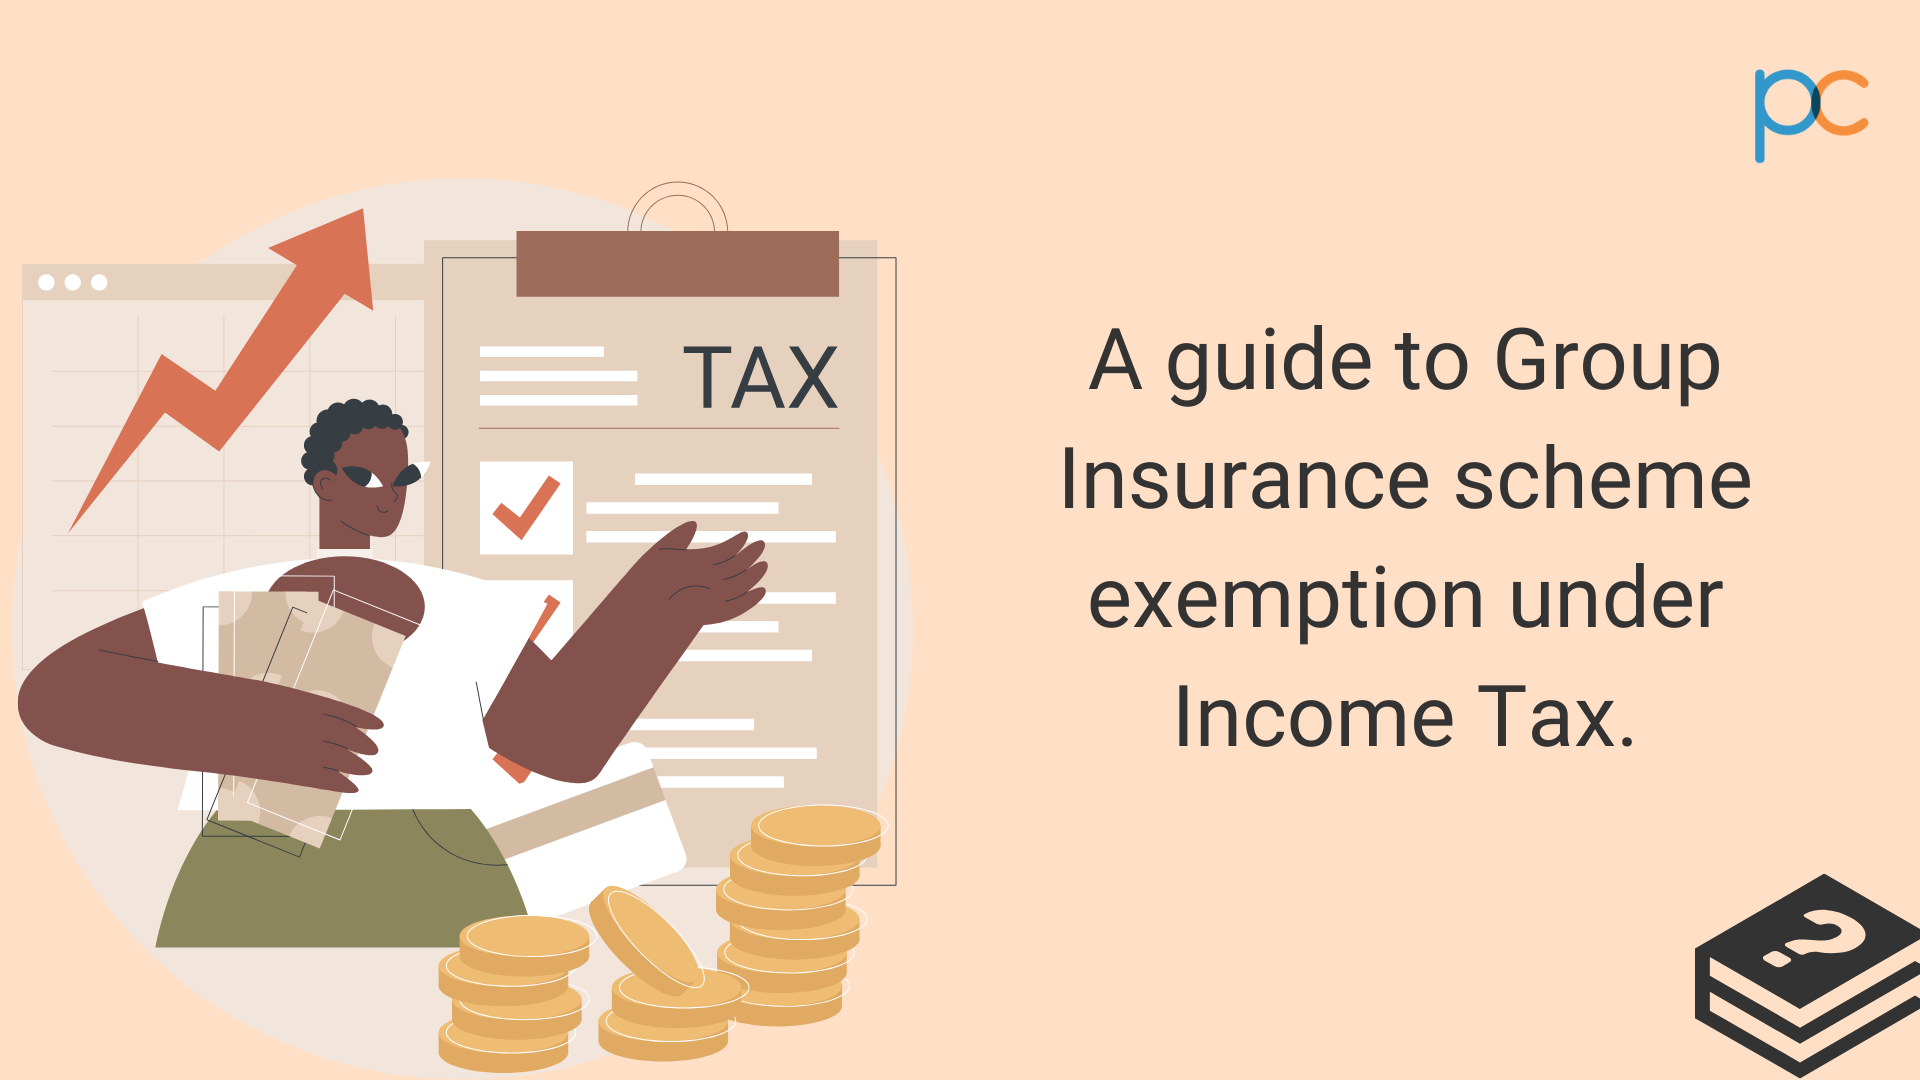 A guide to Group Insurance Scheme Exemption under Income